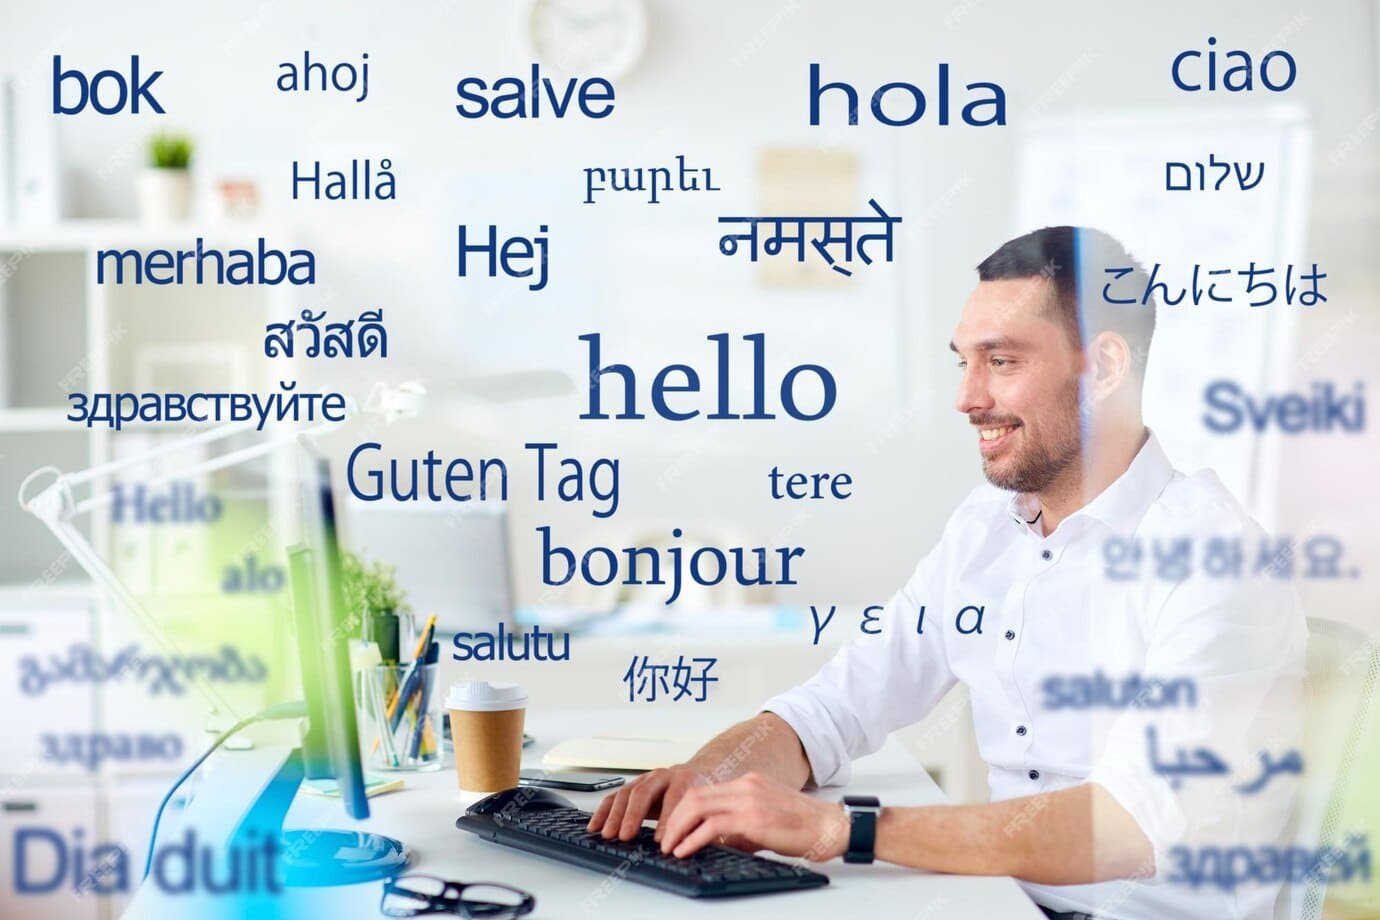 Pimsleur Mastering New Languages Made Easy